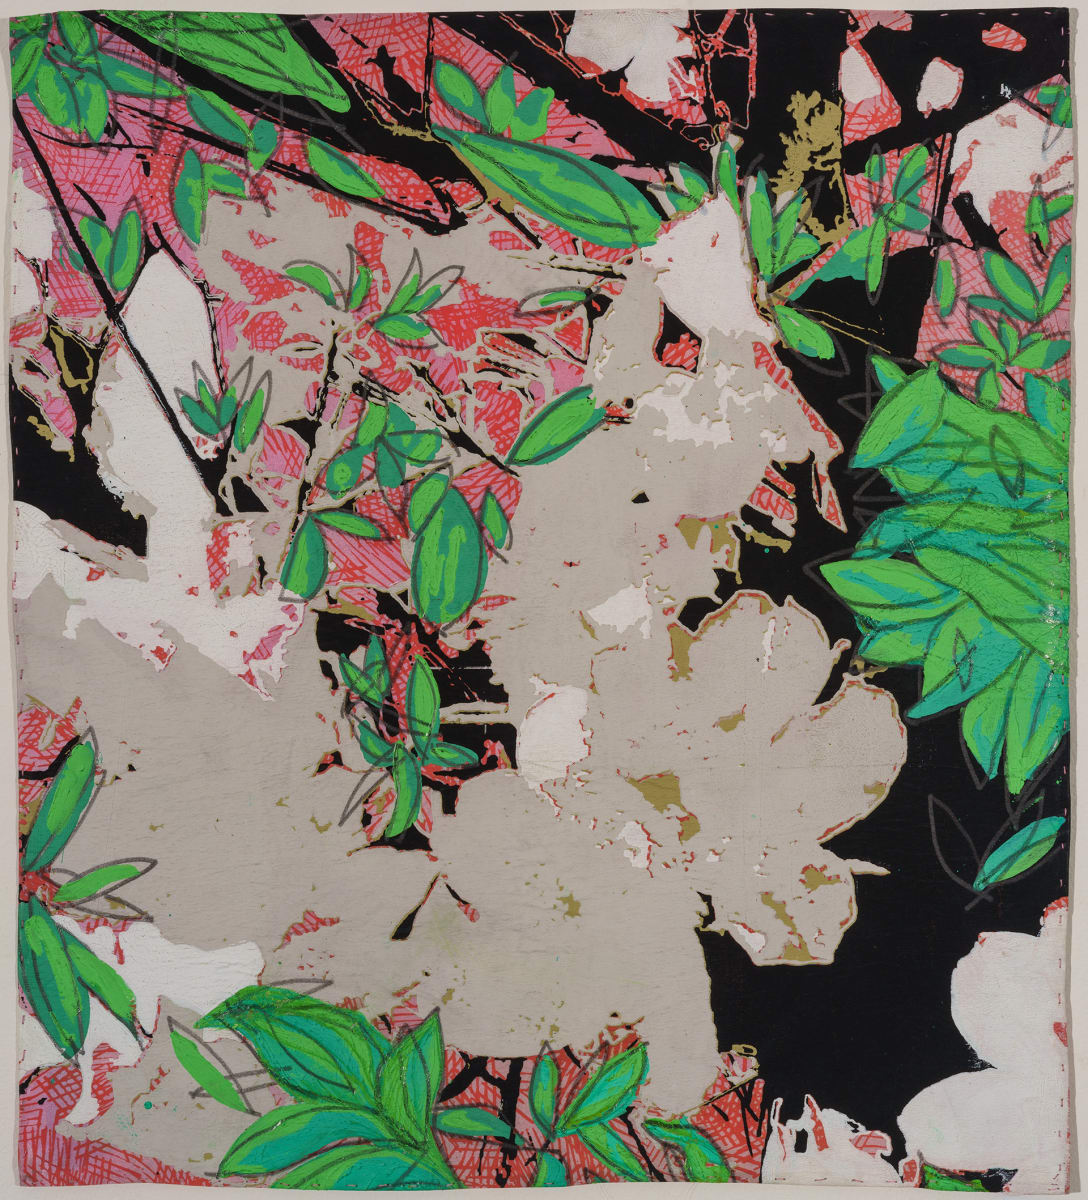 Azalea 7 by Emma Treadwell  Image: Multi-layered Silk Screen Print on Silk Charmeuse. Before printing, the silk is painted with thickened and thinned dyes. Each printed color represents one layer. Each layer requires one screen. This print uses 7 screens. The edges are hand stitched.